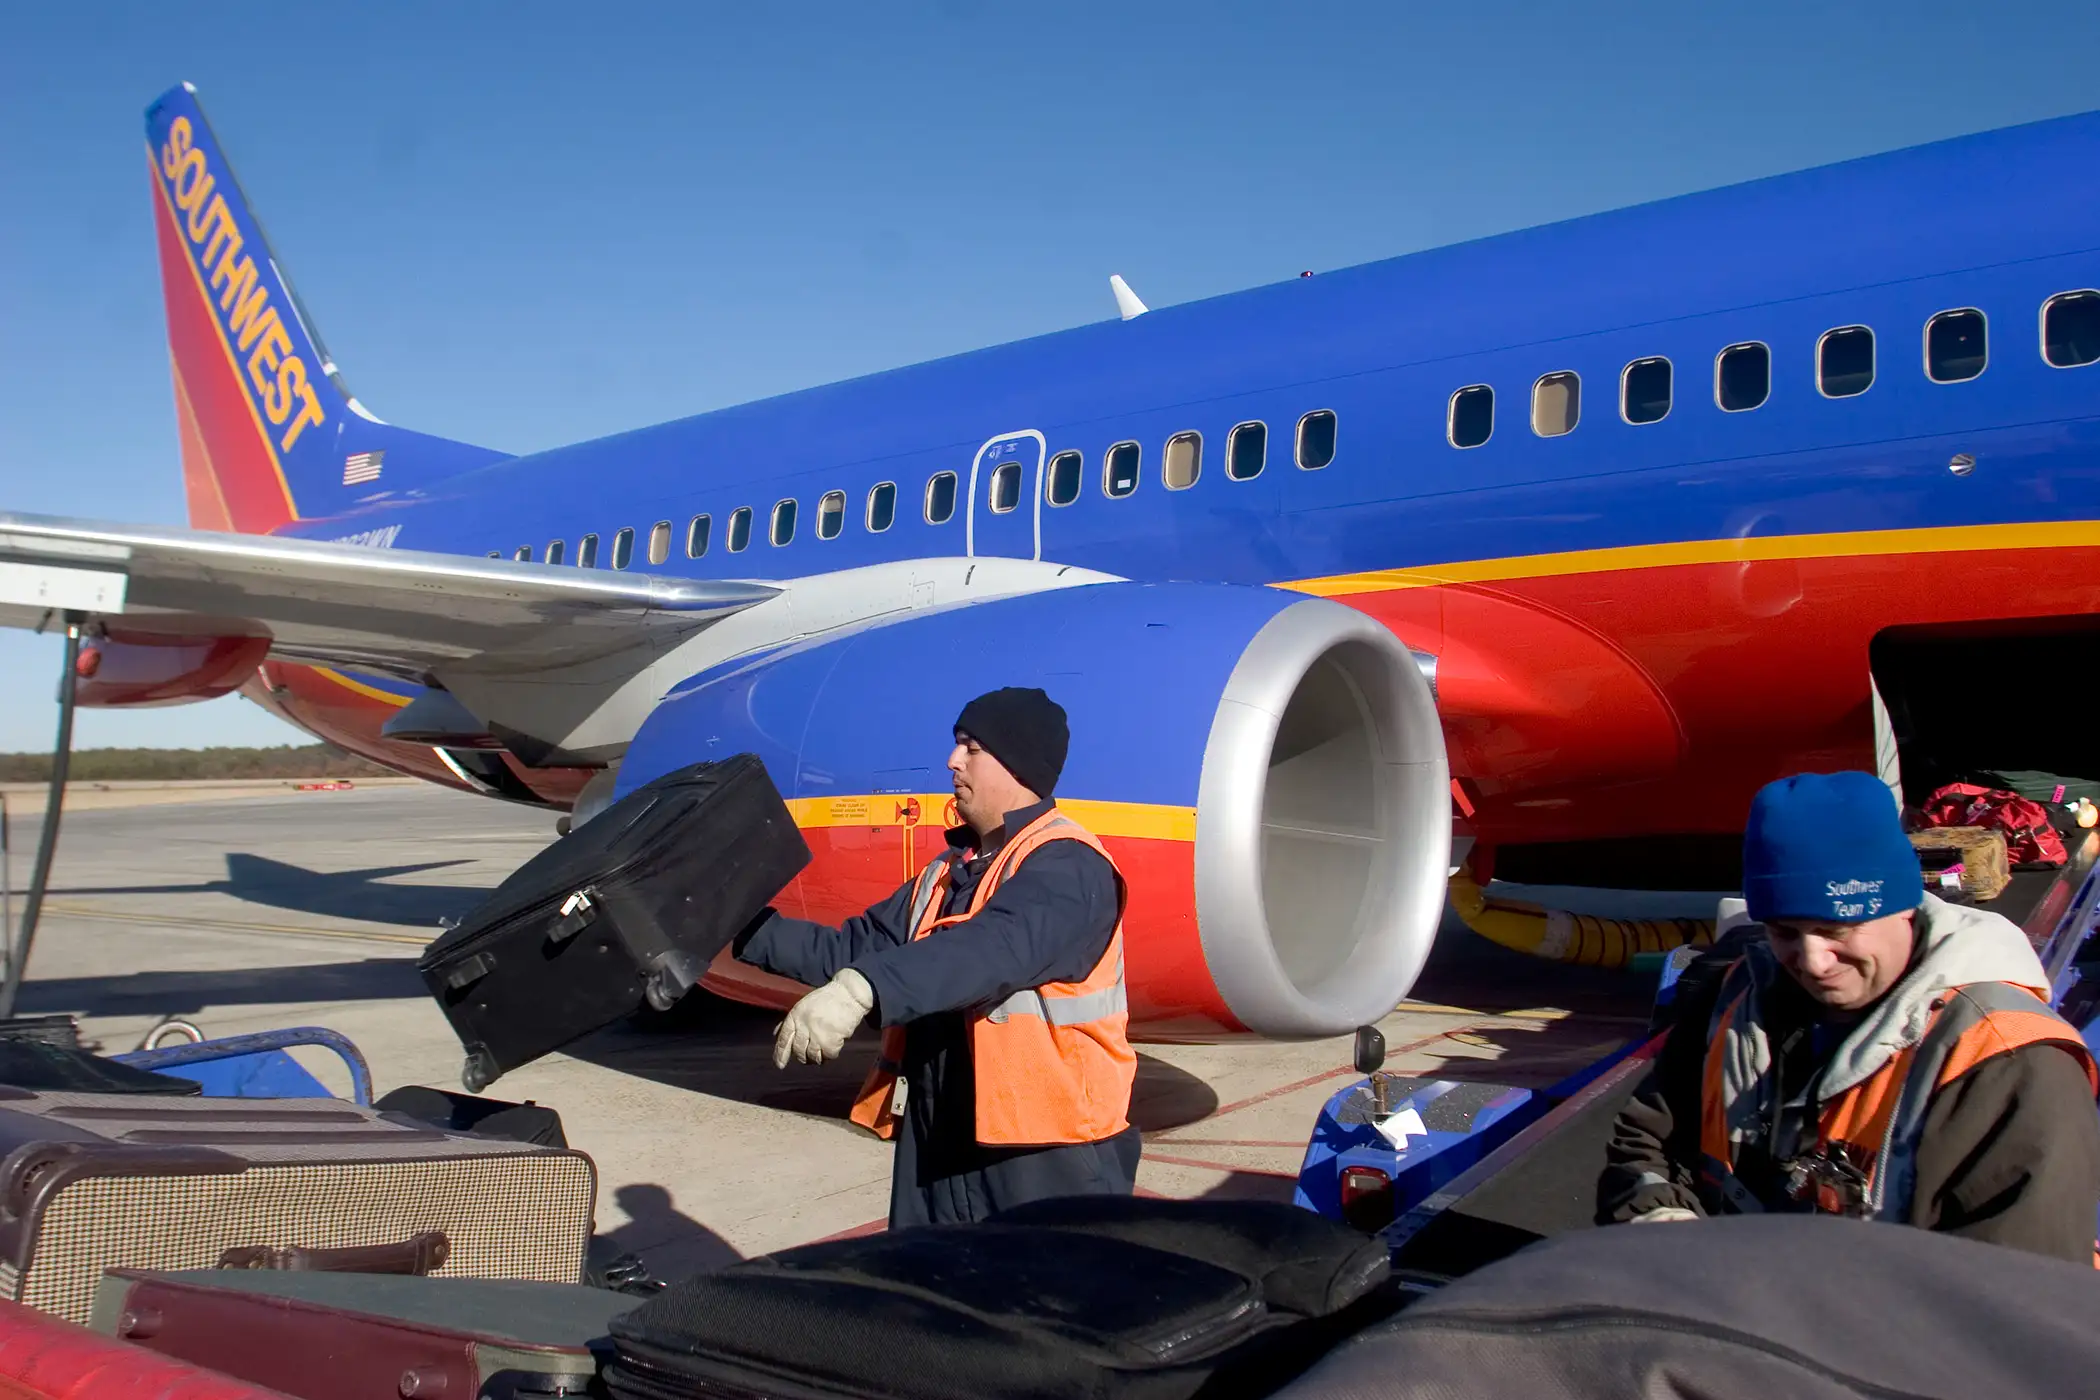 Southwest Airlines luggage handlers tossing bags